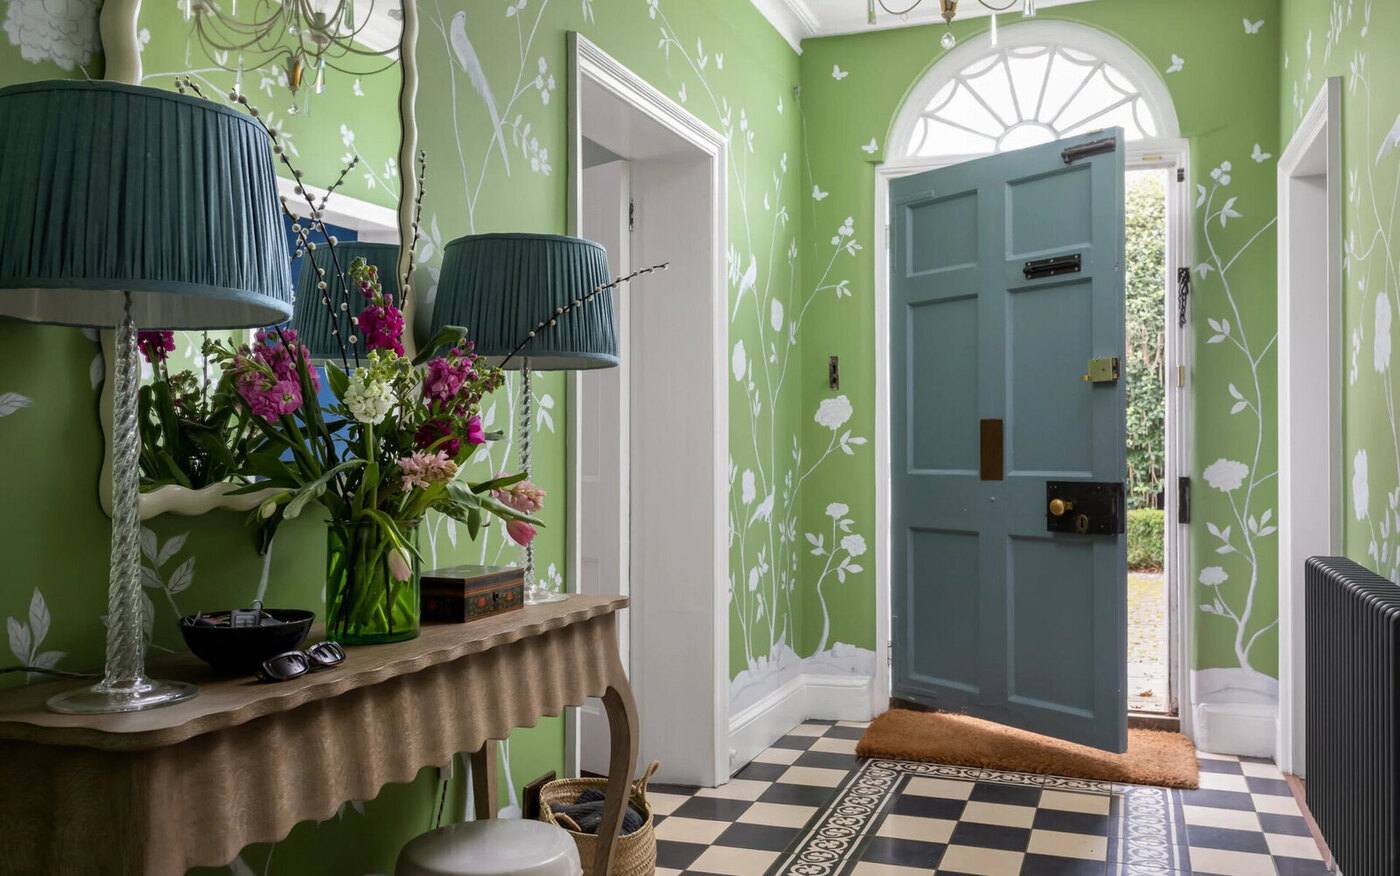 Green Hallway Ideas: 10 Designs For A Refreshing, Natural Space